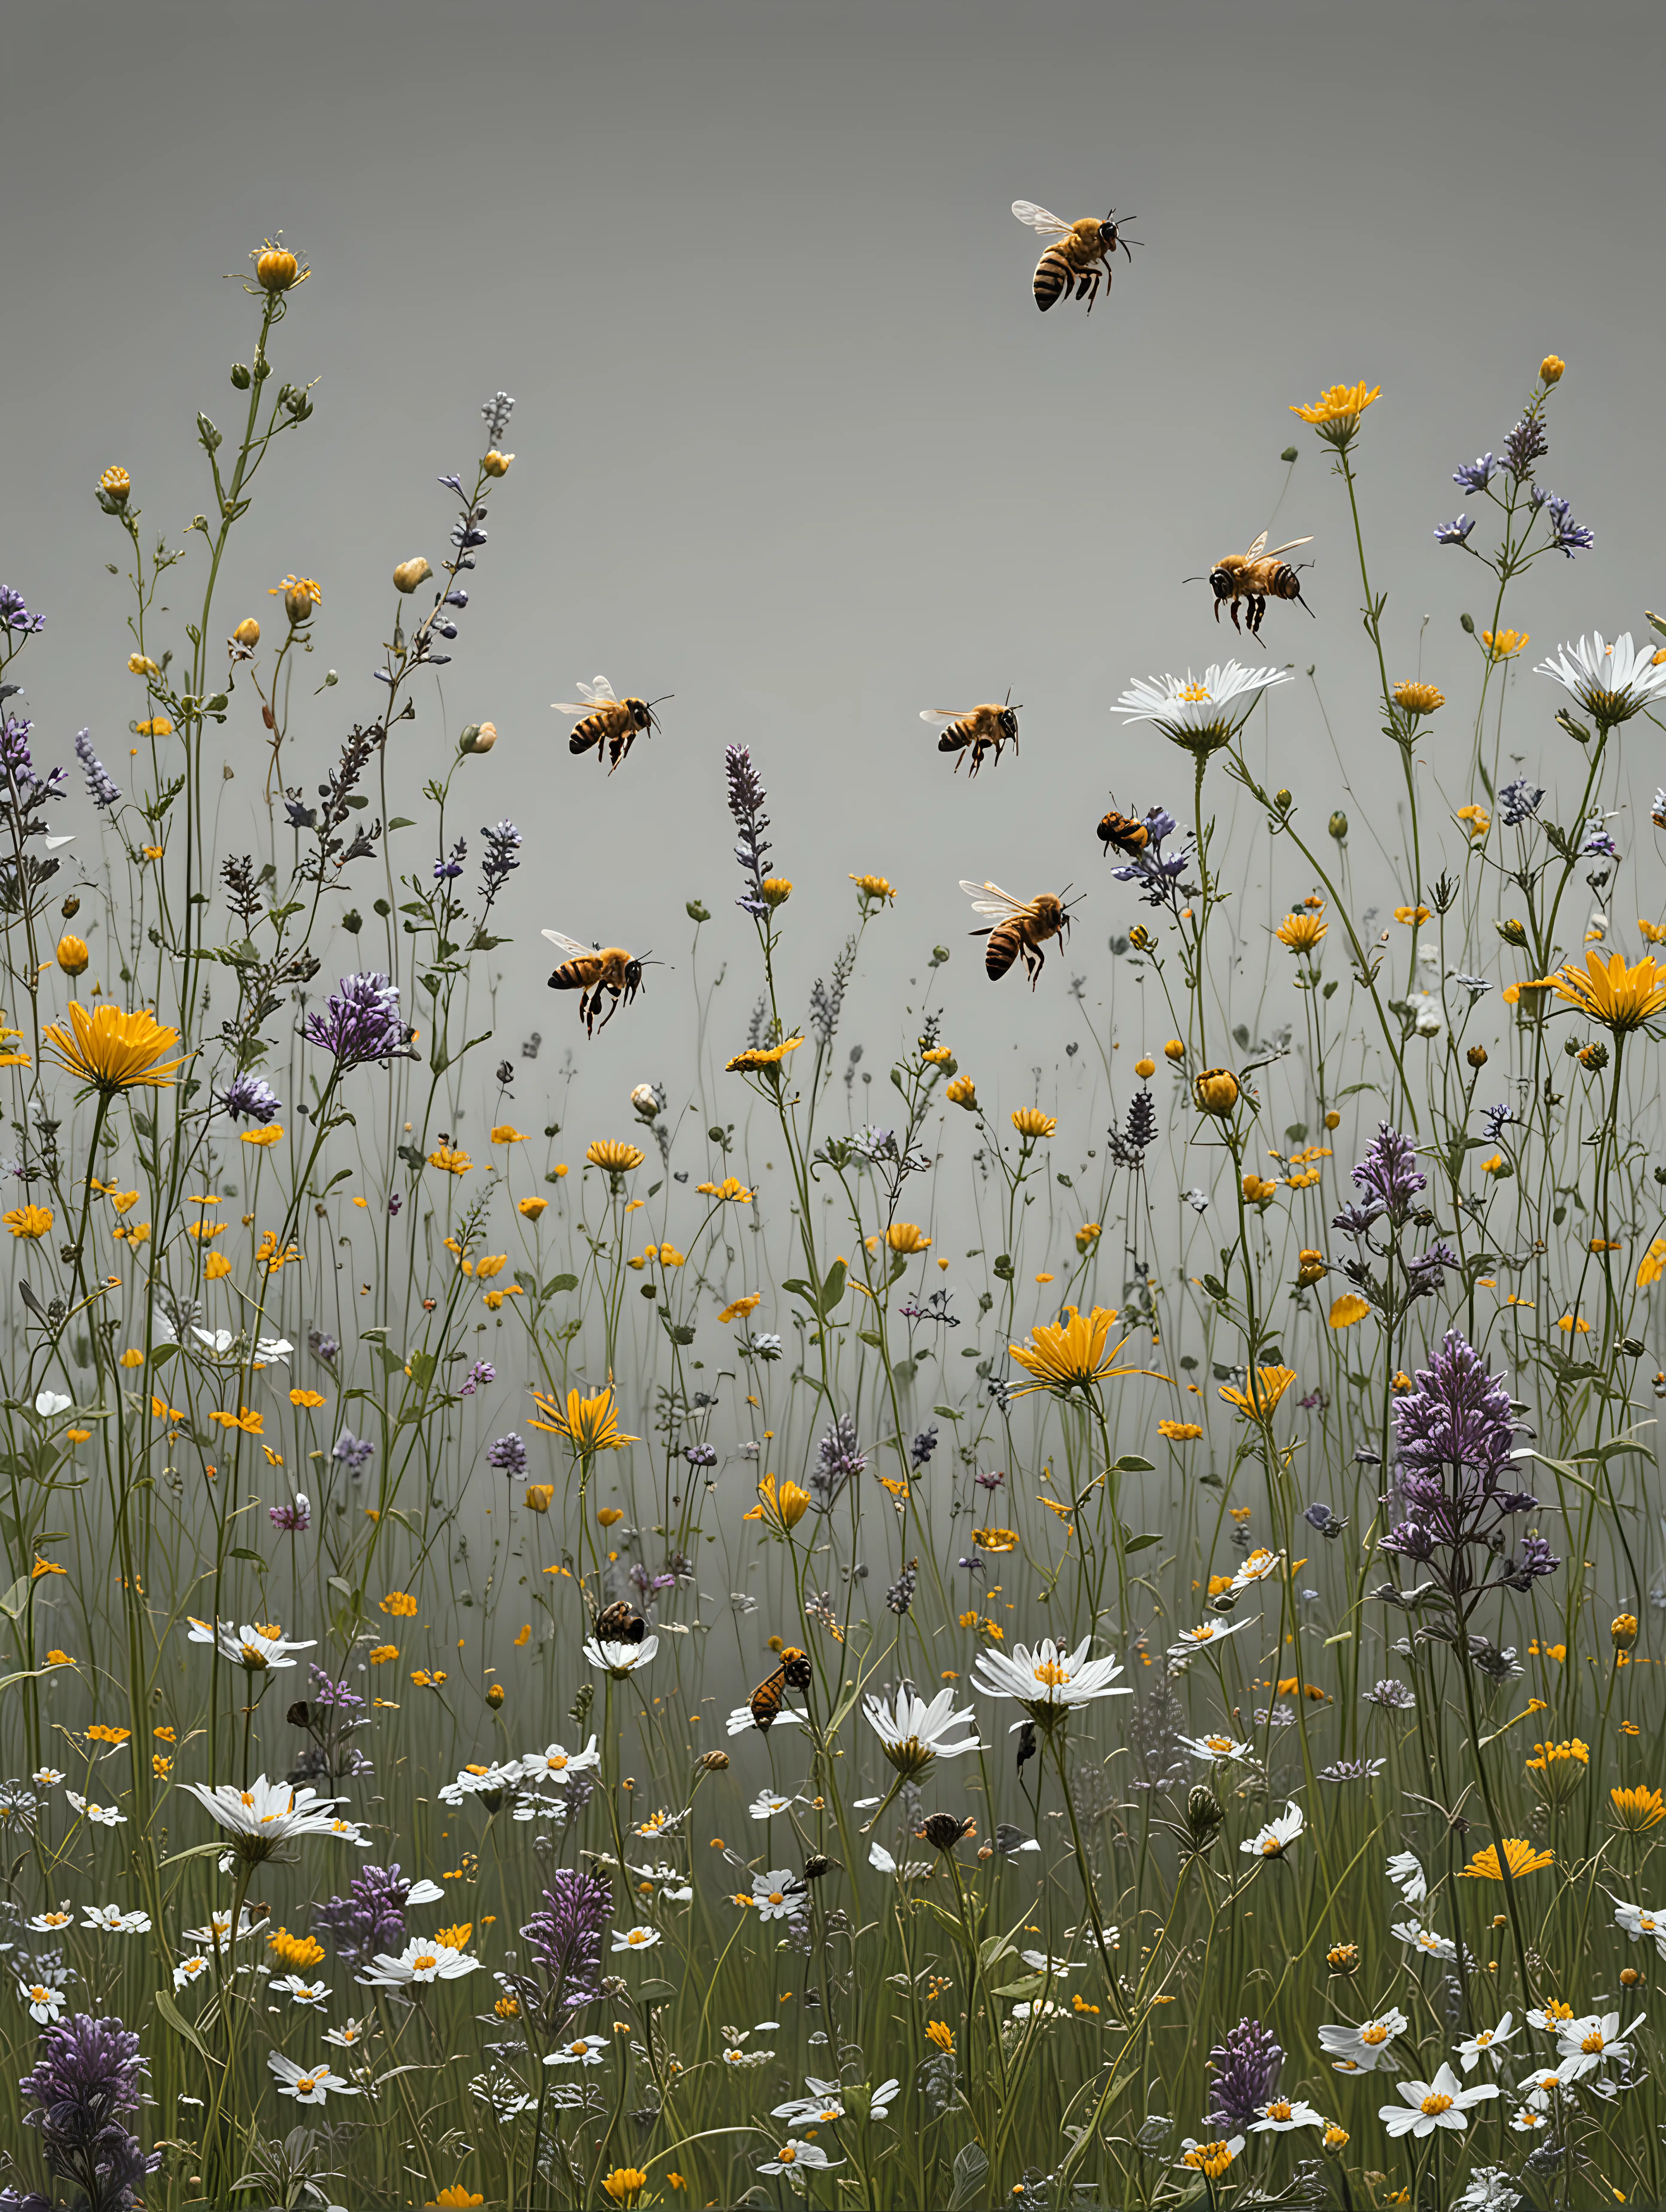 bees visit meadow wildflowers growing across the bottom of a neutral gray background.

Hyper-realistic. Highly detailed.